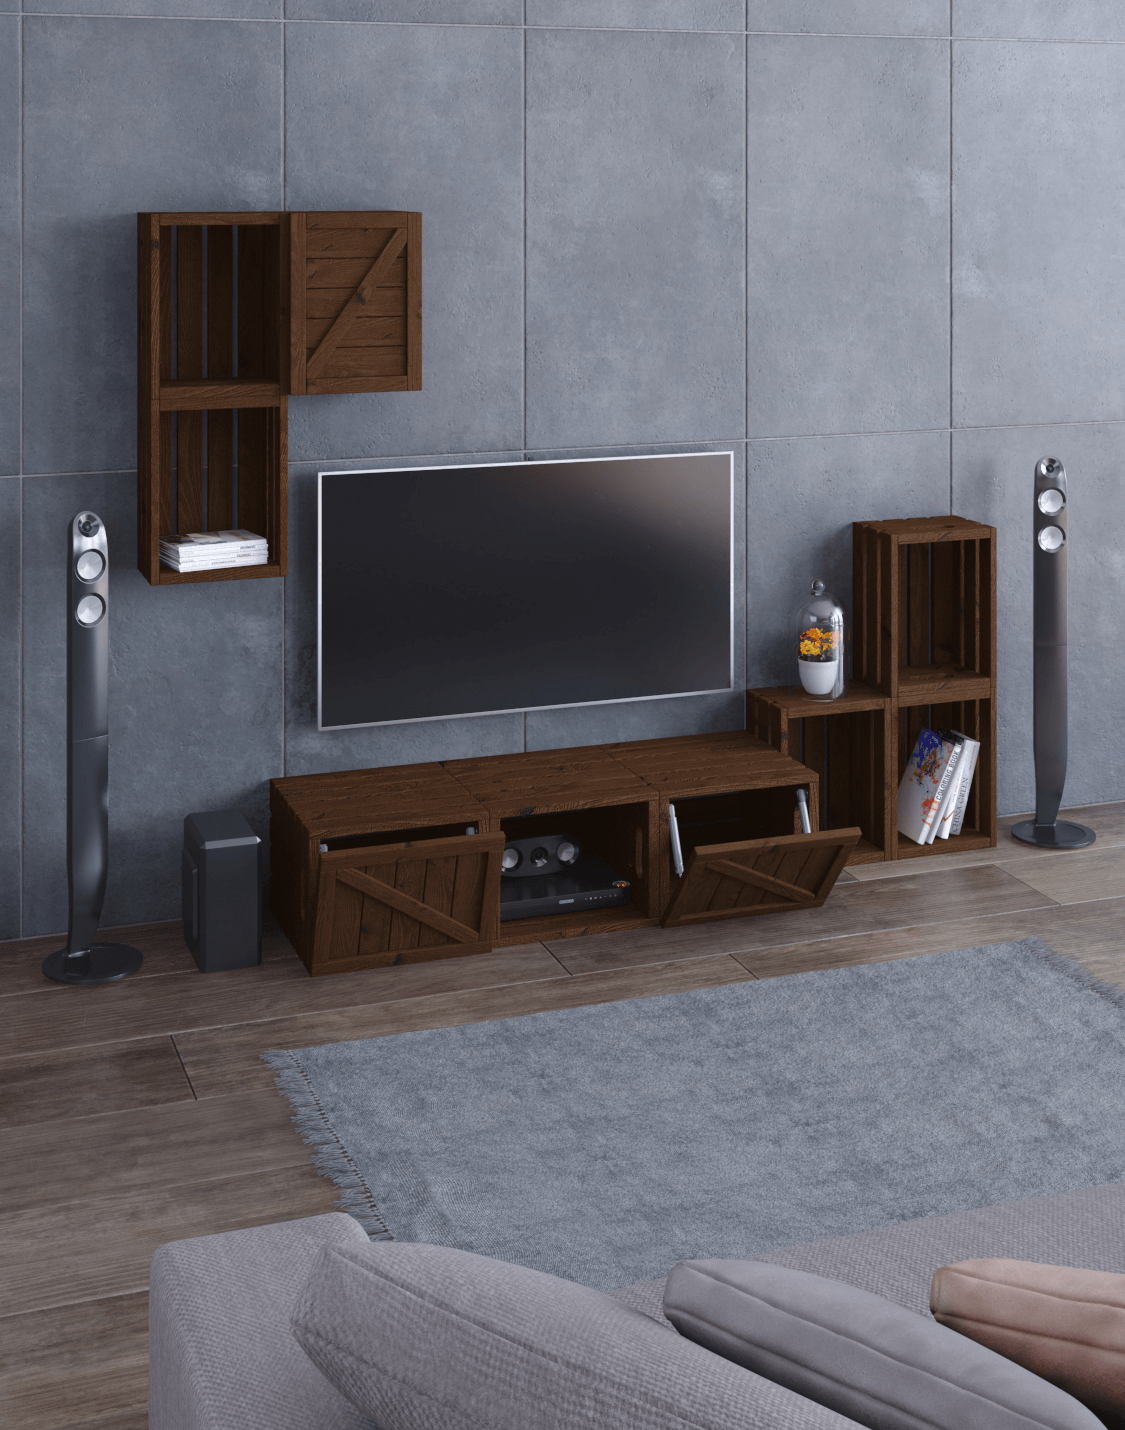 Grace TV Unit Modular And real wood furniture product